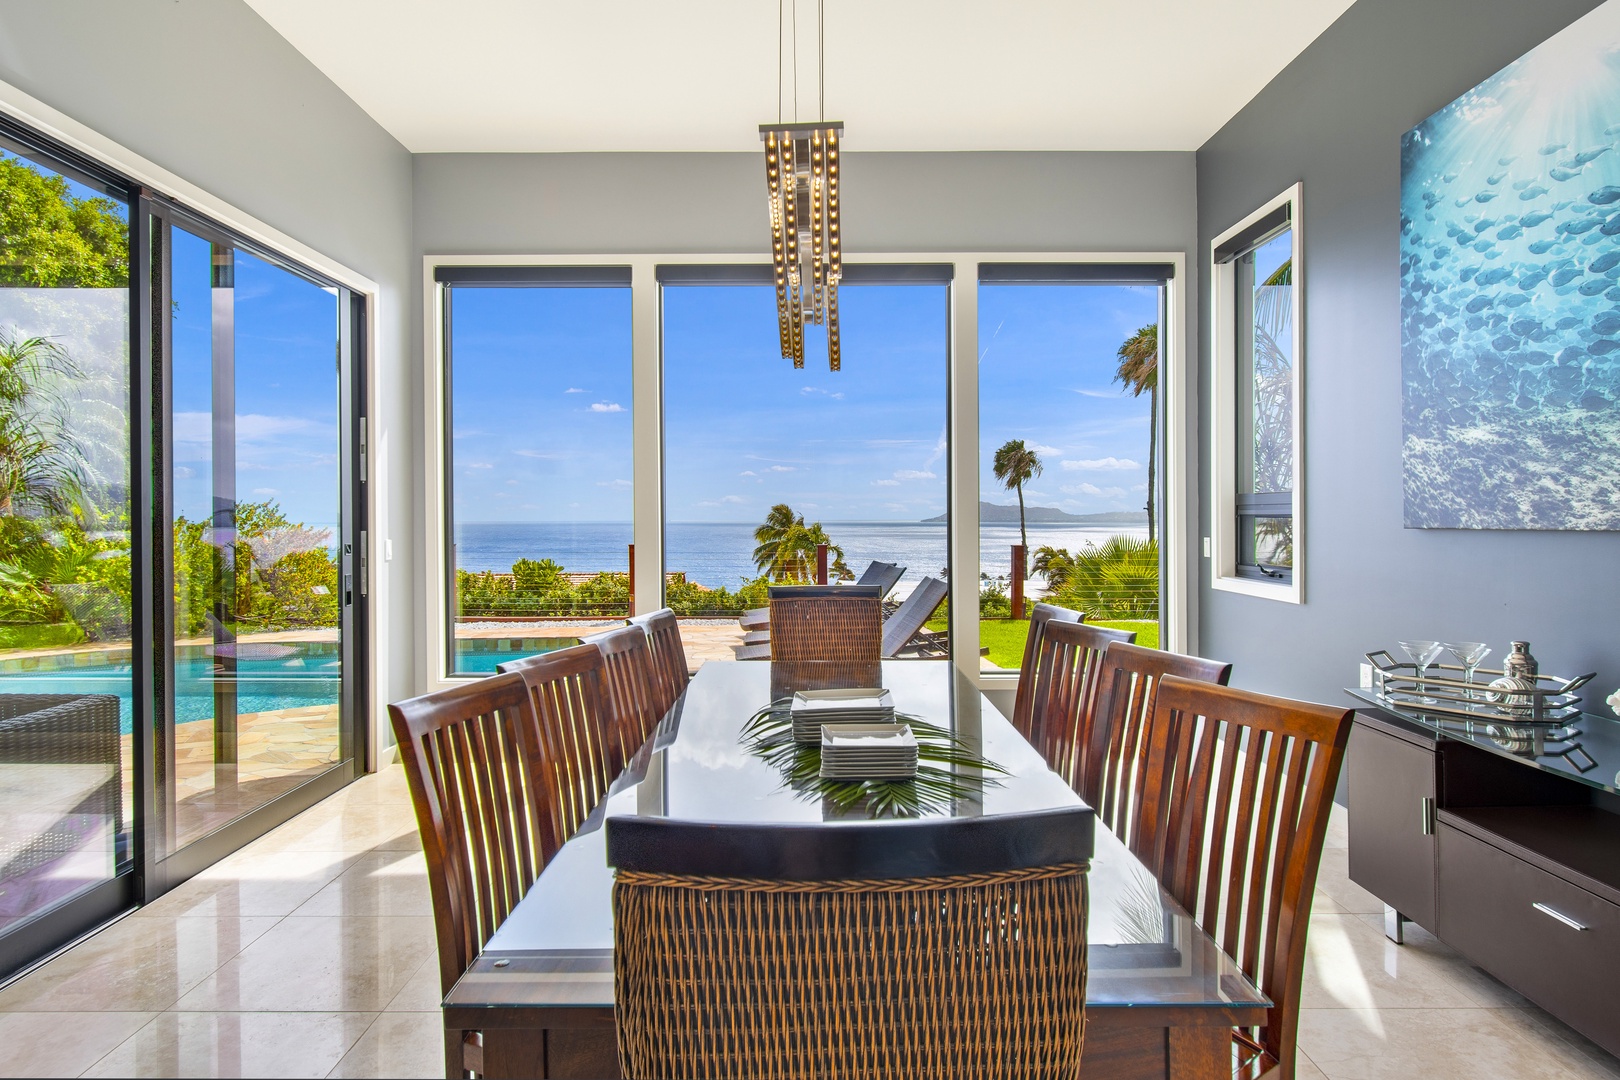 Honolulu Vacation Rentals, Aloha Nalu - Dining for 10 with gorgeous views!